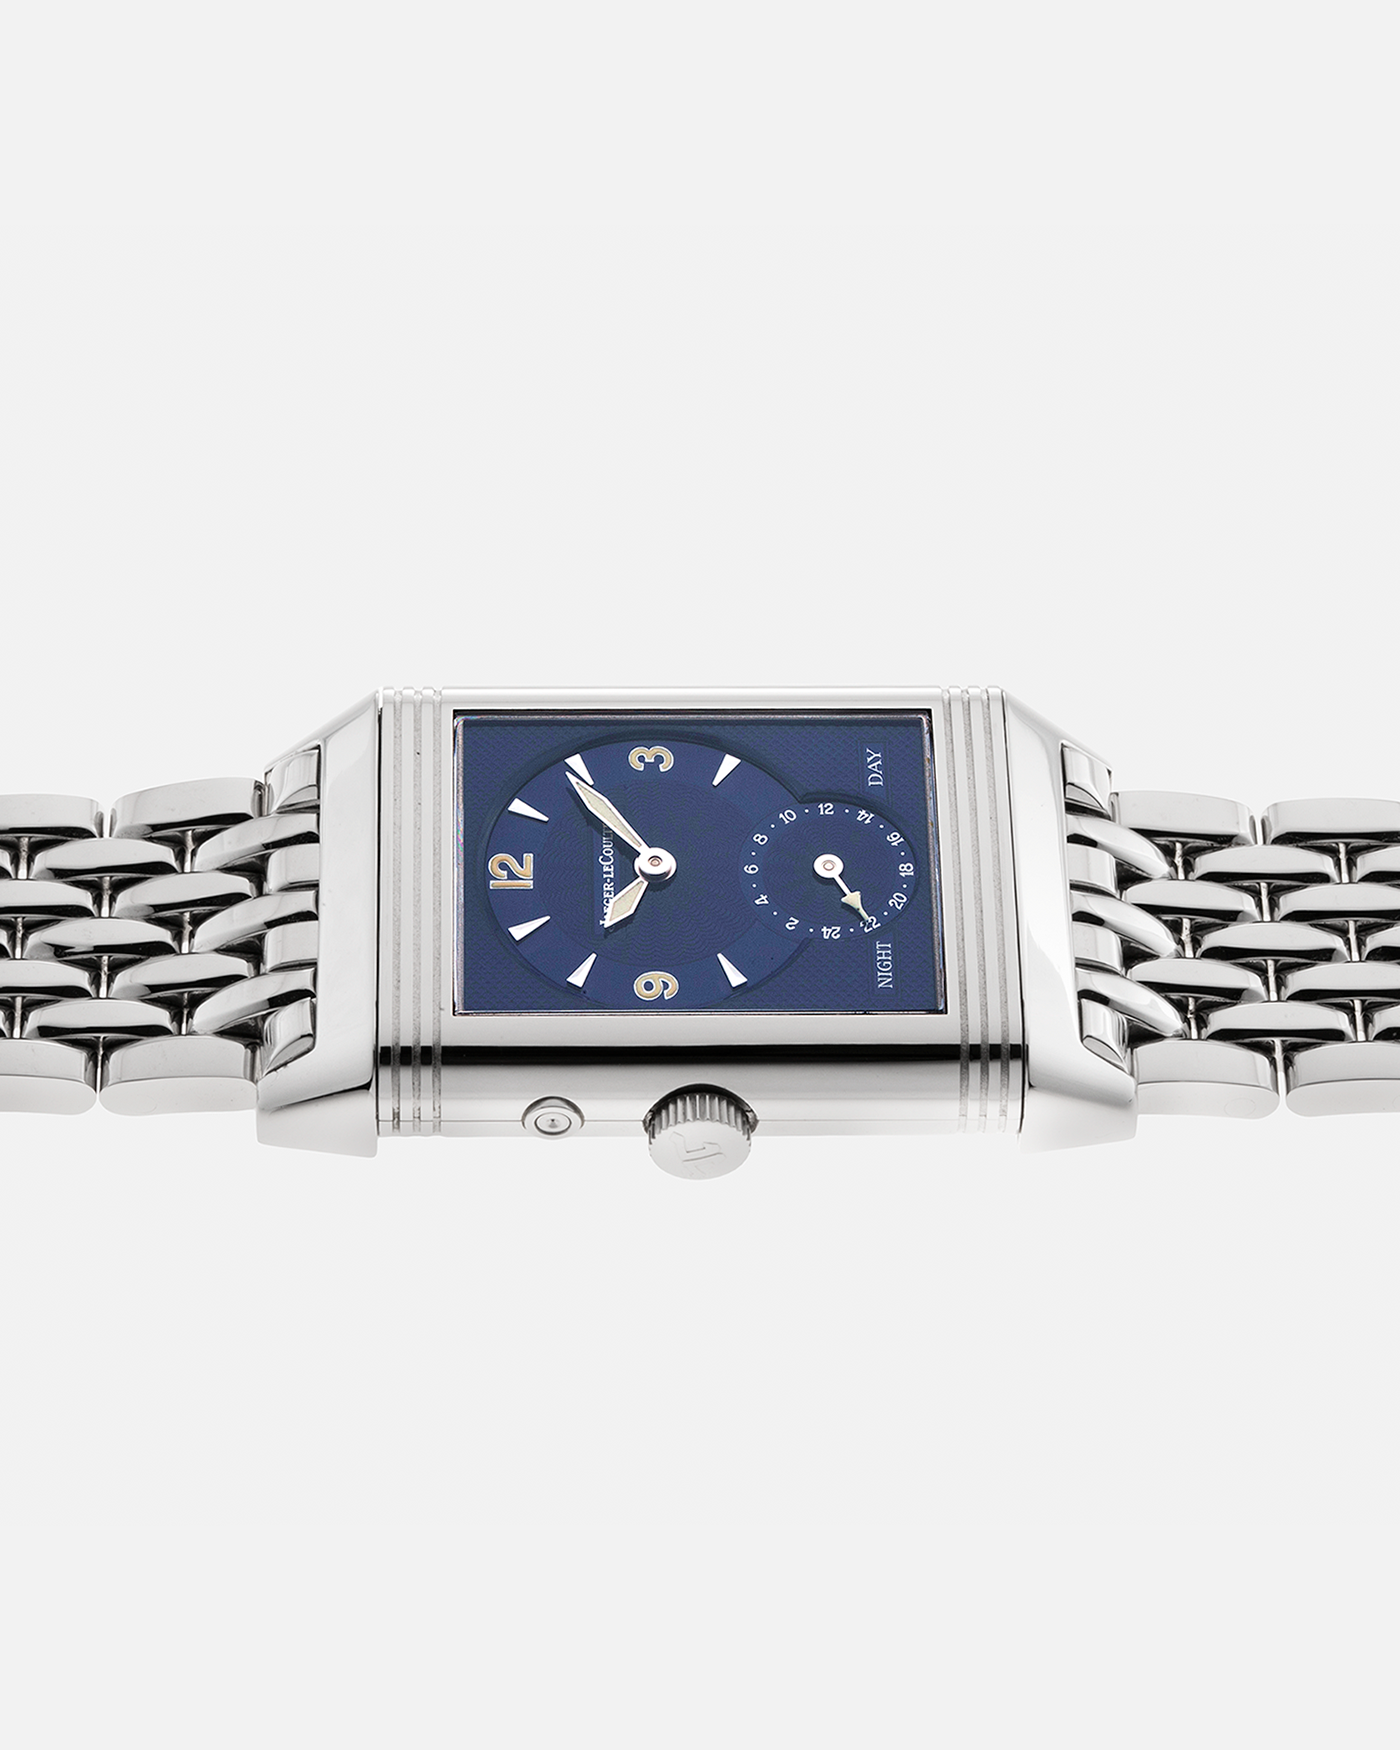 Brand: Jaeger LeCoultre Year: 2011 Model: Reverso Duoface Japan Edition Blue, Limited Edition of 300 Pieces Reference Number: 270.8.54 Material: Stainless Steel Movement: Jaeger LeCoultre Cal. 854, Manual-Wind Case Diameter: 42mm x 26mm Lug Width: 19mm Bracelet/Strap: Jaeger LeCoultre Stainless Steel Bracelet, additional Jaeger LeCoultre Black Alligator Leather Strap with Signed Stainless Steel Deployant Clasp